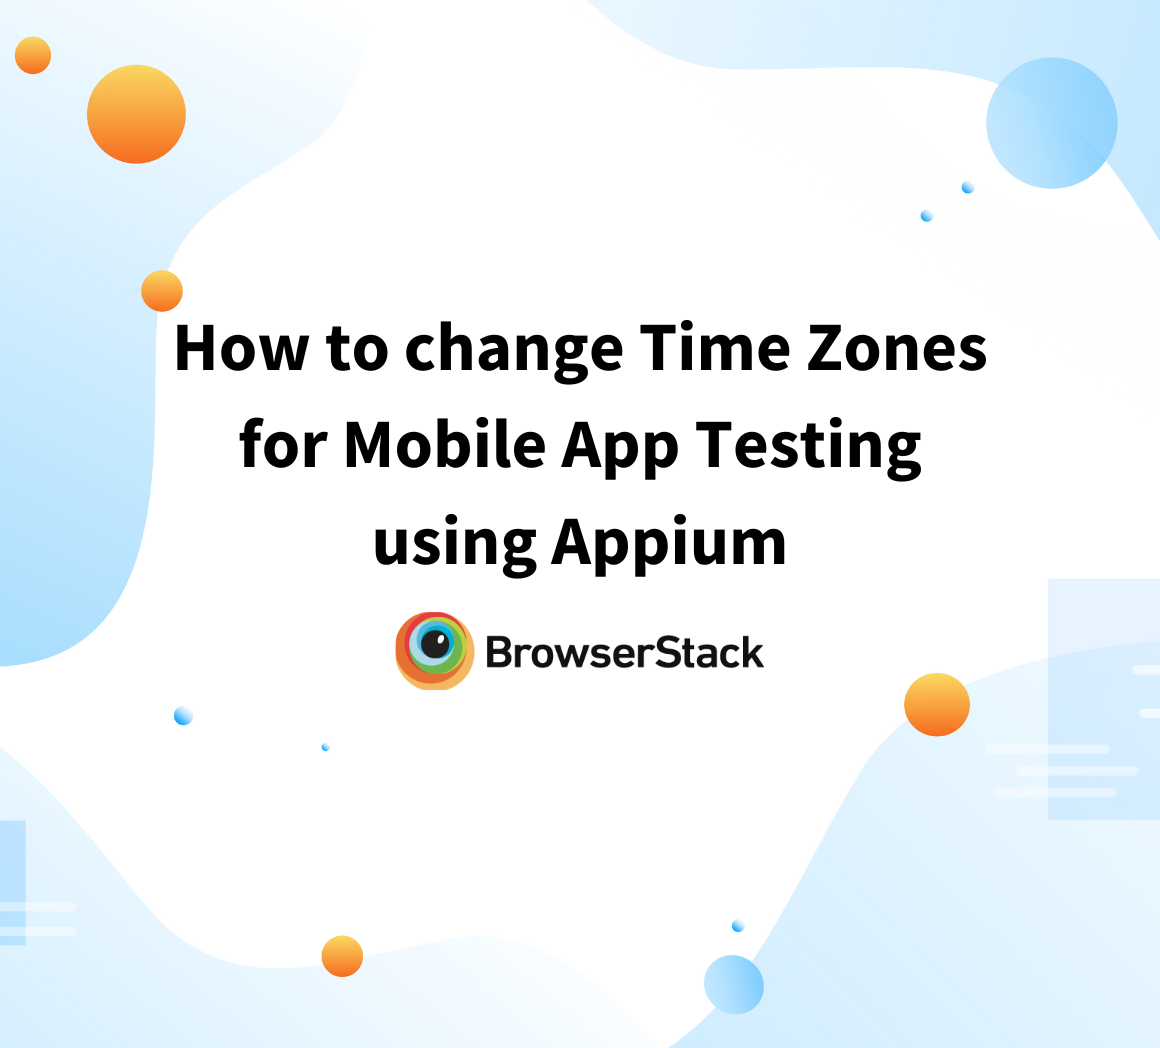 How to change Time Zones for Mobile App Testing using Appium